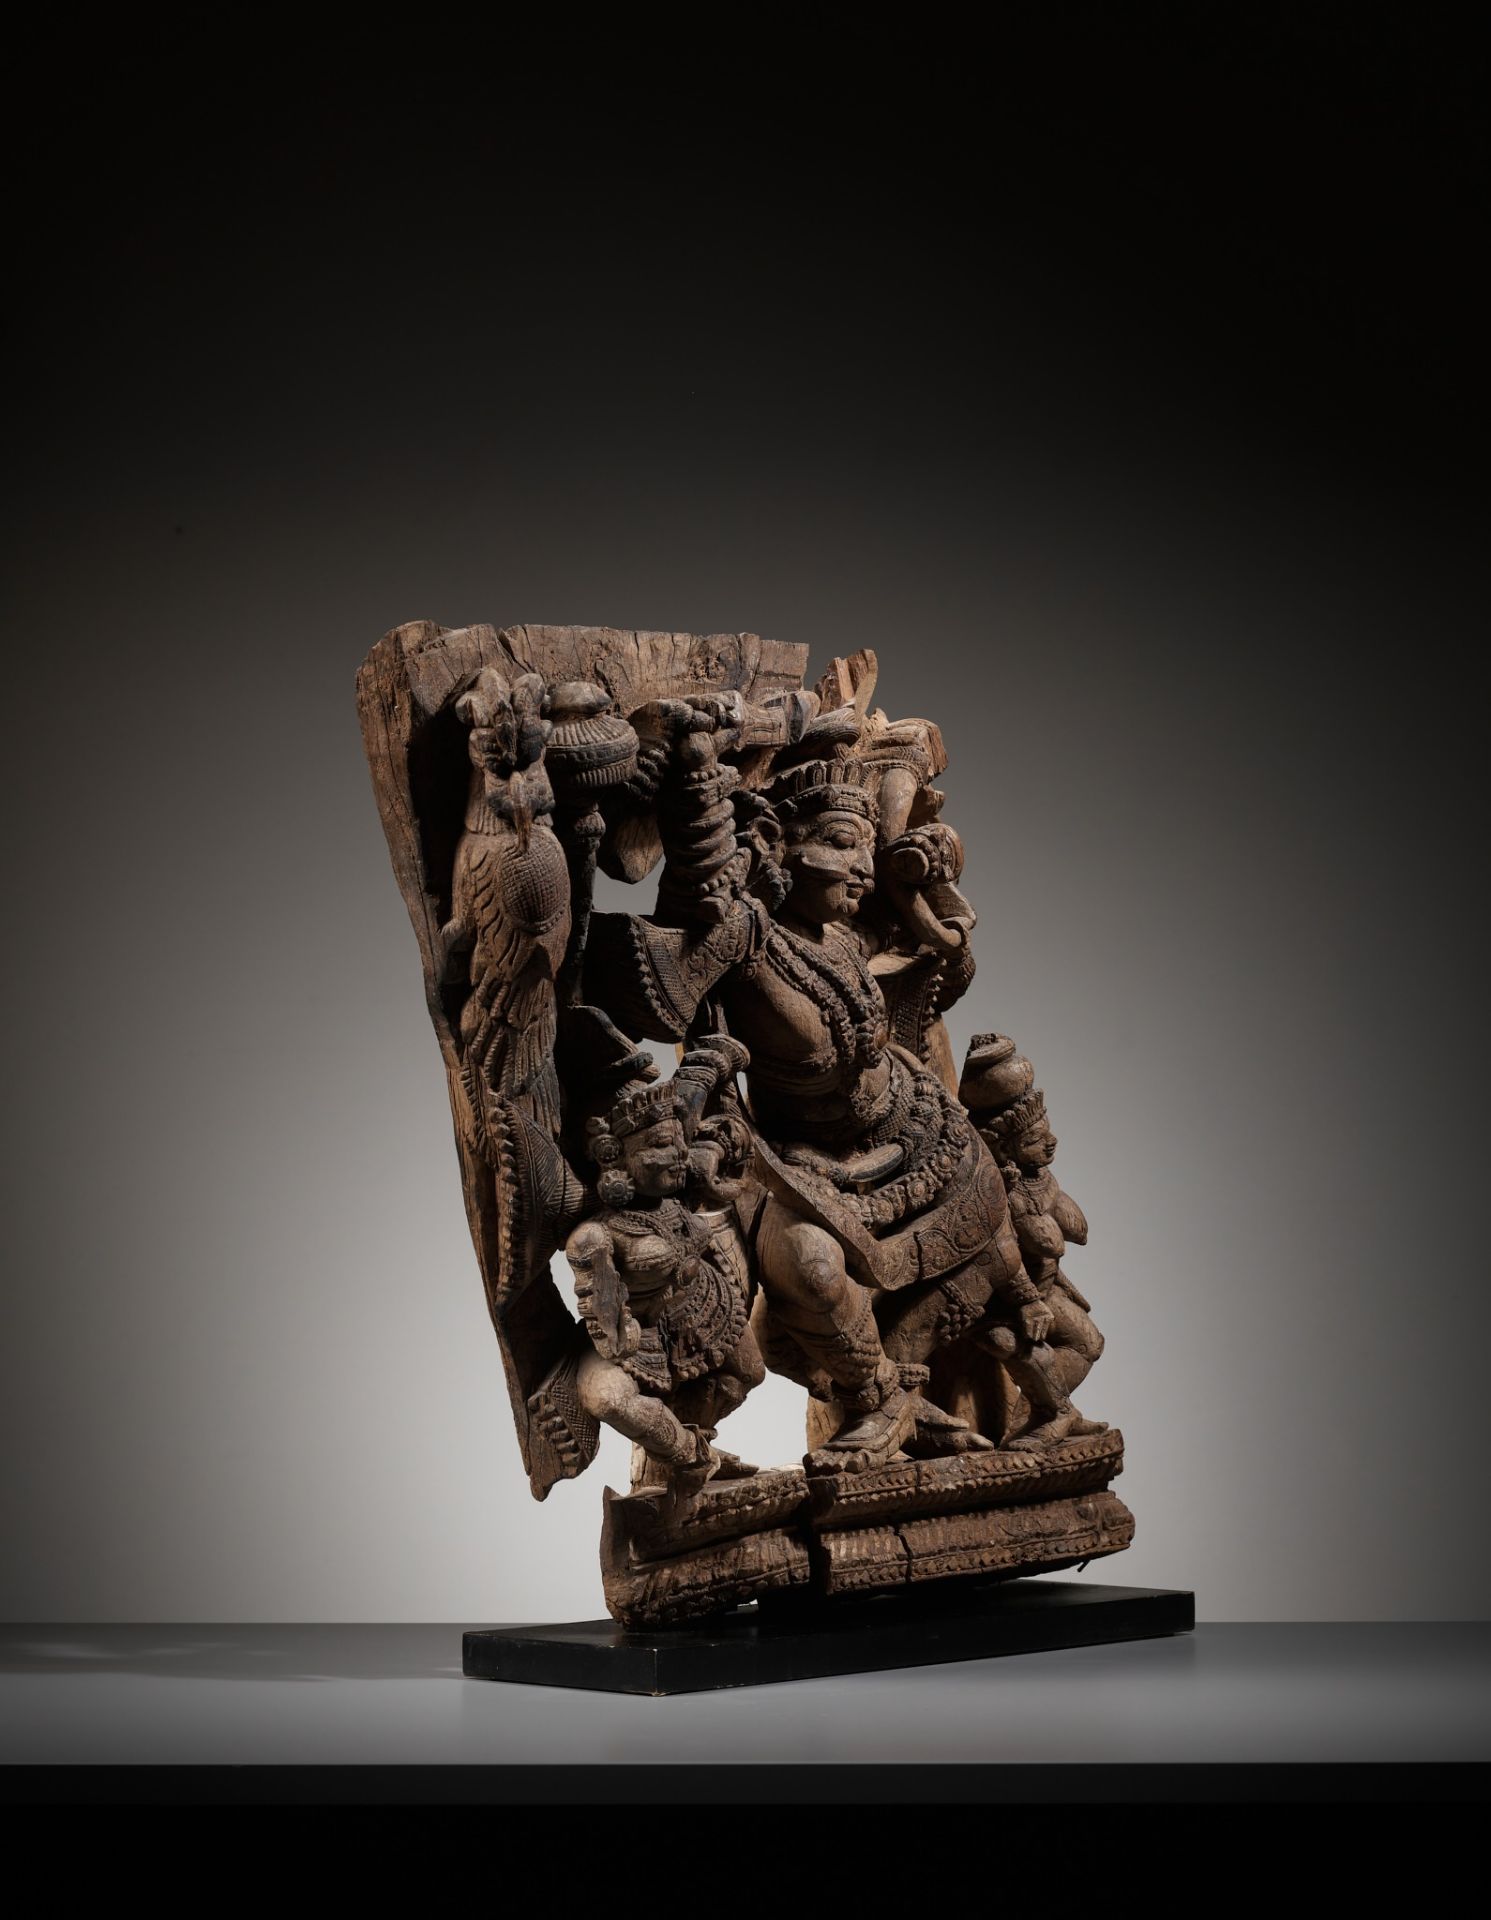 A WOOD RELIEF OF A DANCING DEITY, KERALA, SOUTH INDIA, 18TH TO EARLY 19TH CENTURY - Image 12 of 12